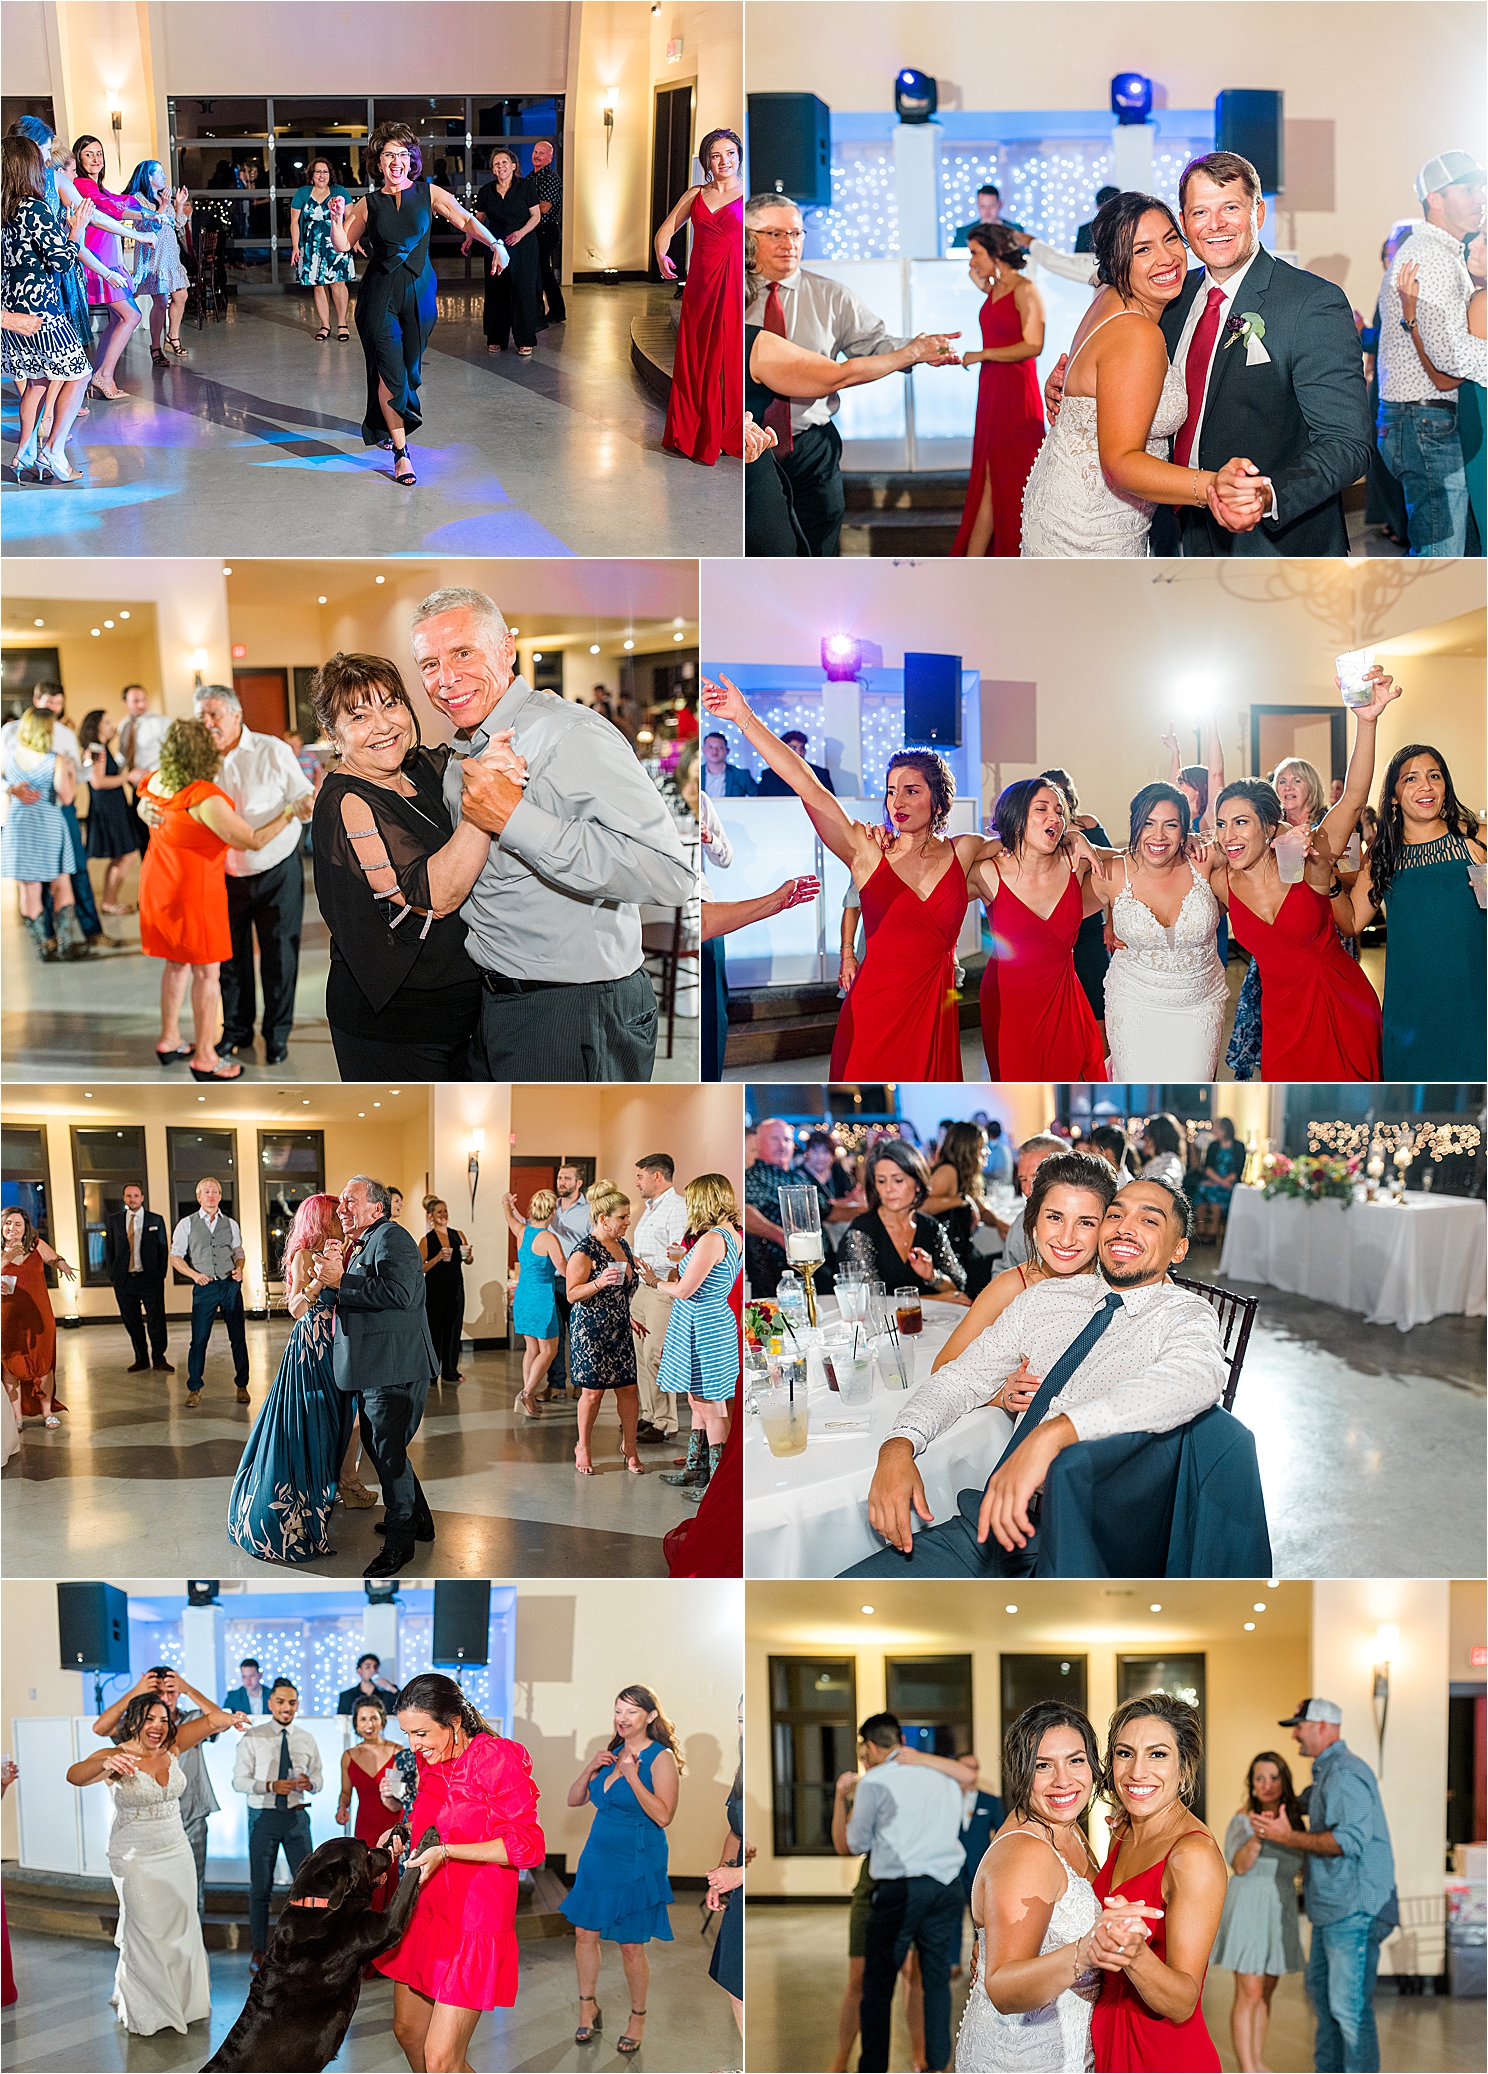 Wedding guests dancing during a reception at Paniolo Ranch in Boerne, Texas